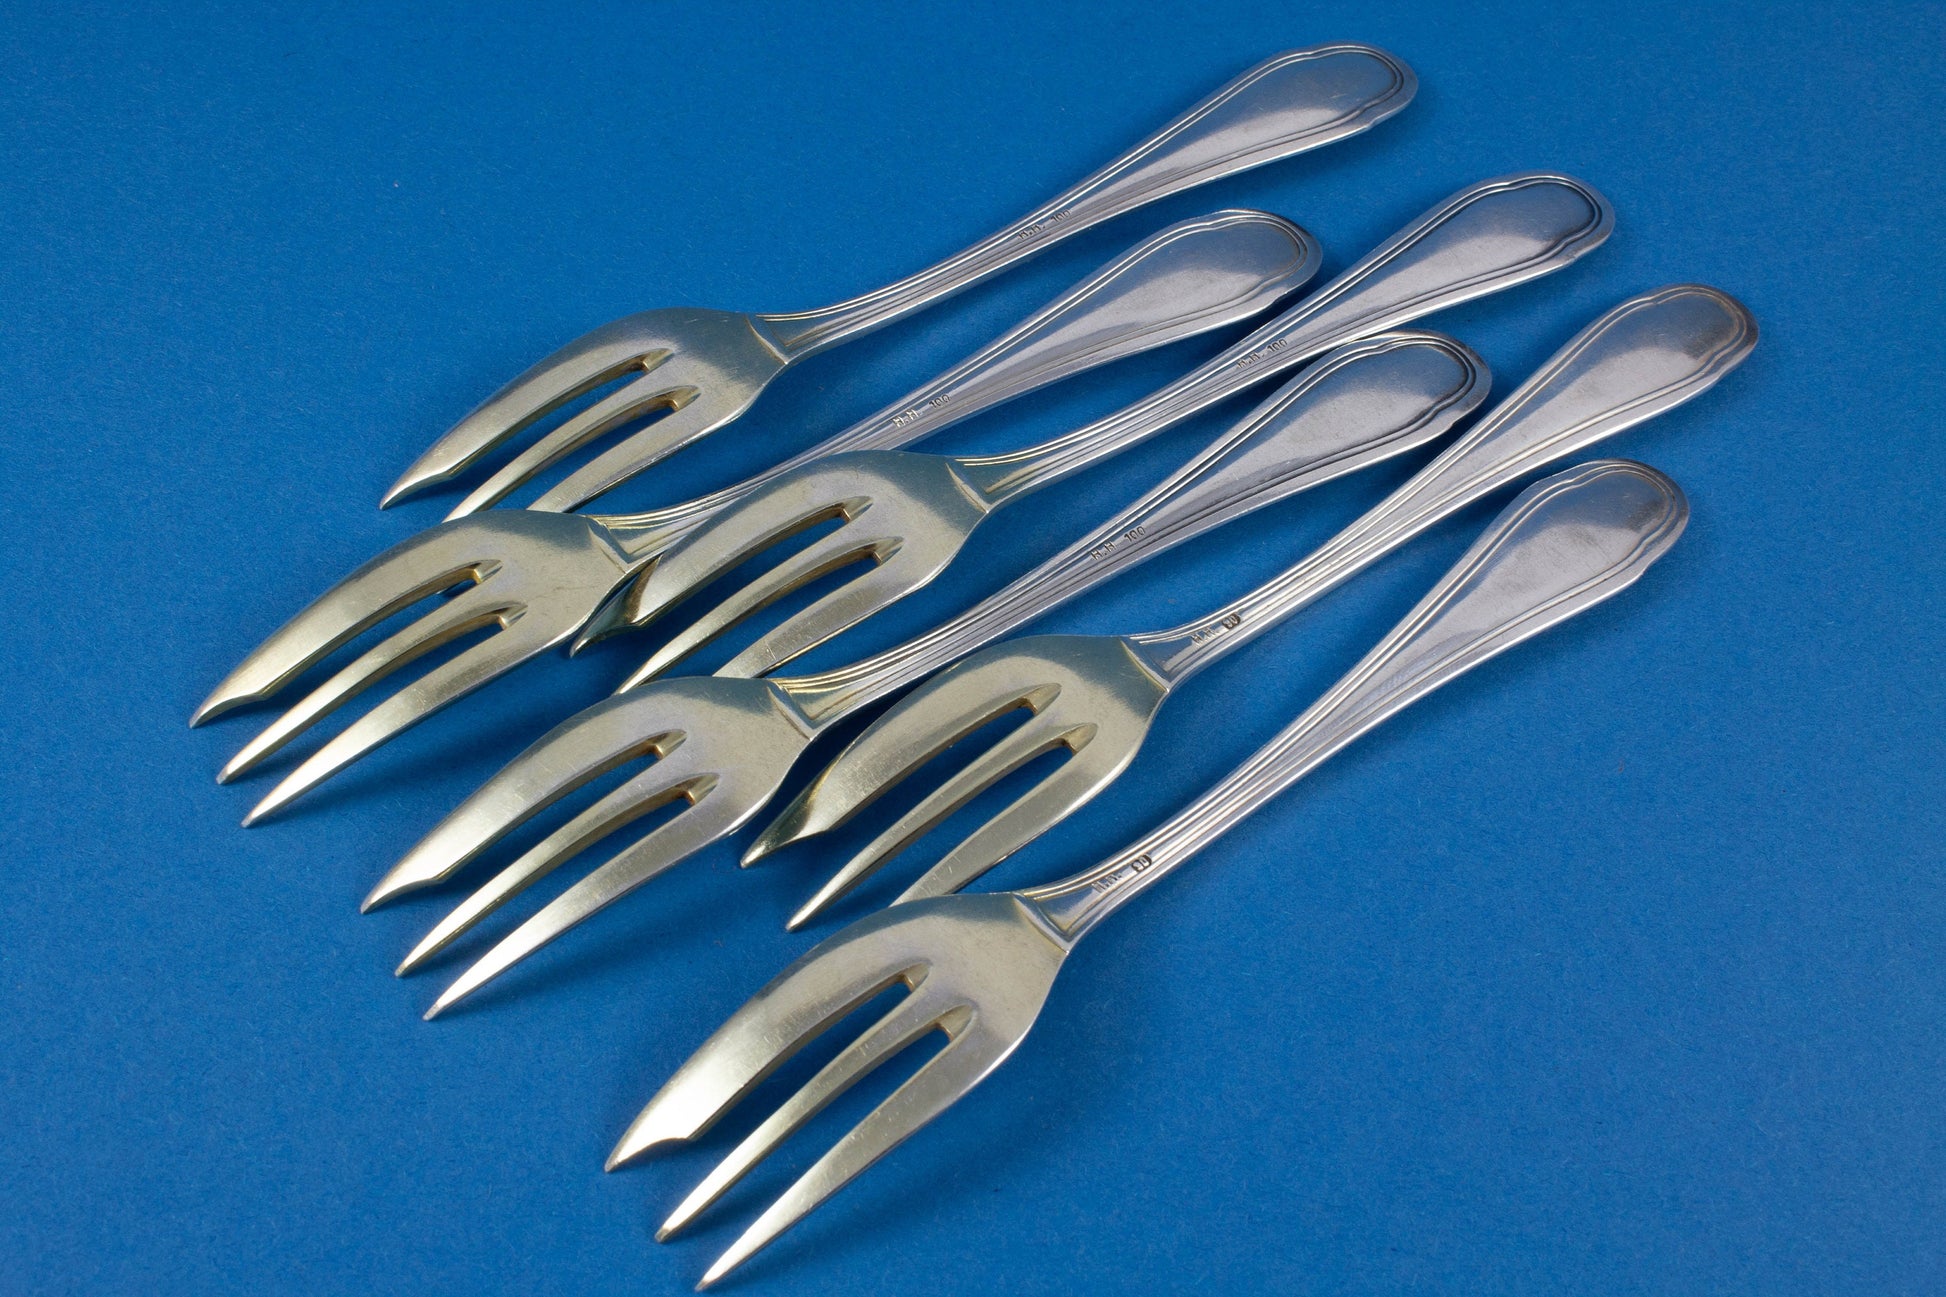 6 beautiful art nouvea cake forks from 1900